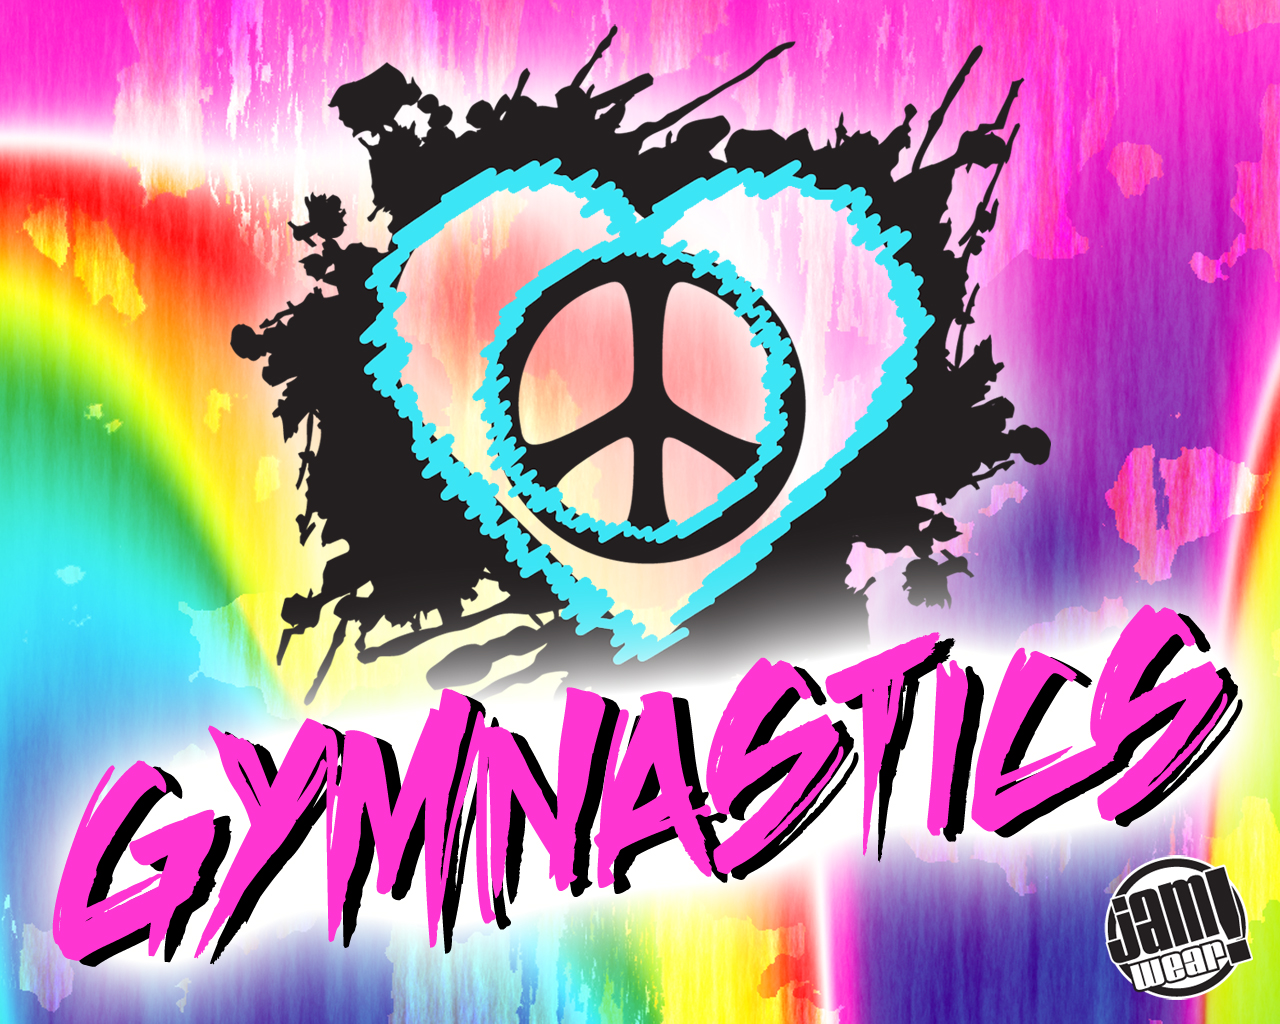 Gymnastics backgrounds and wallpapers